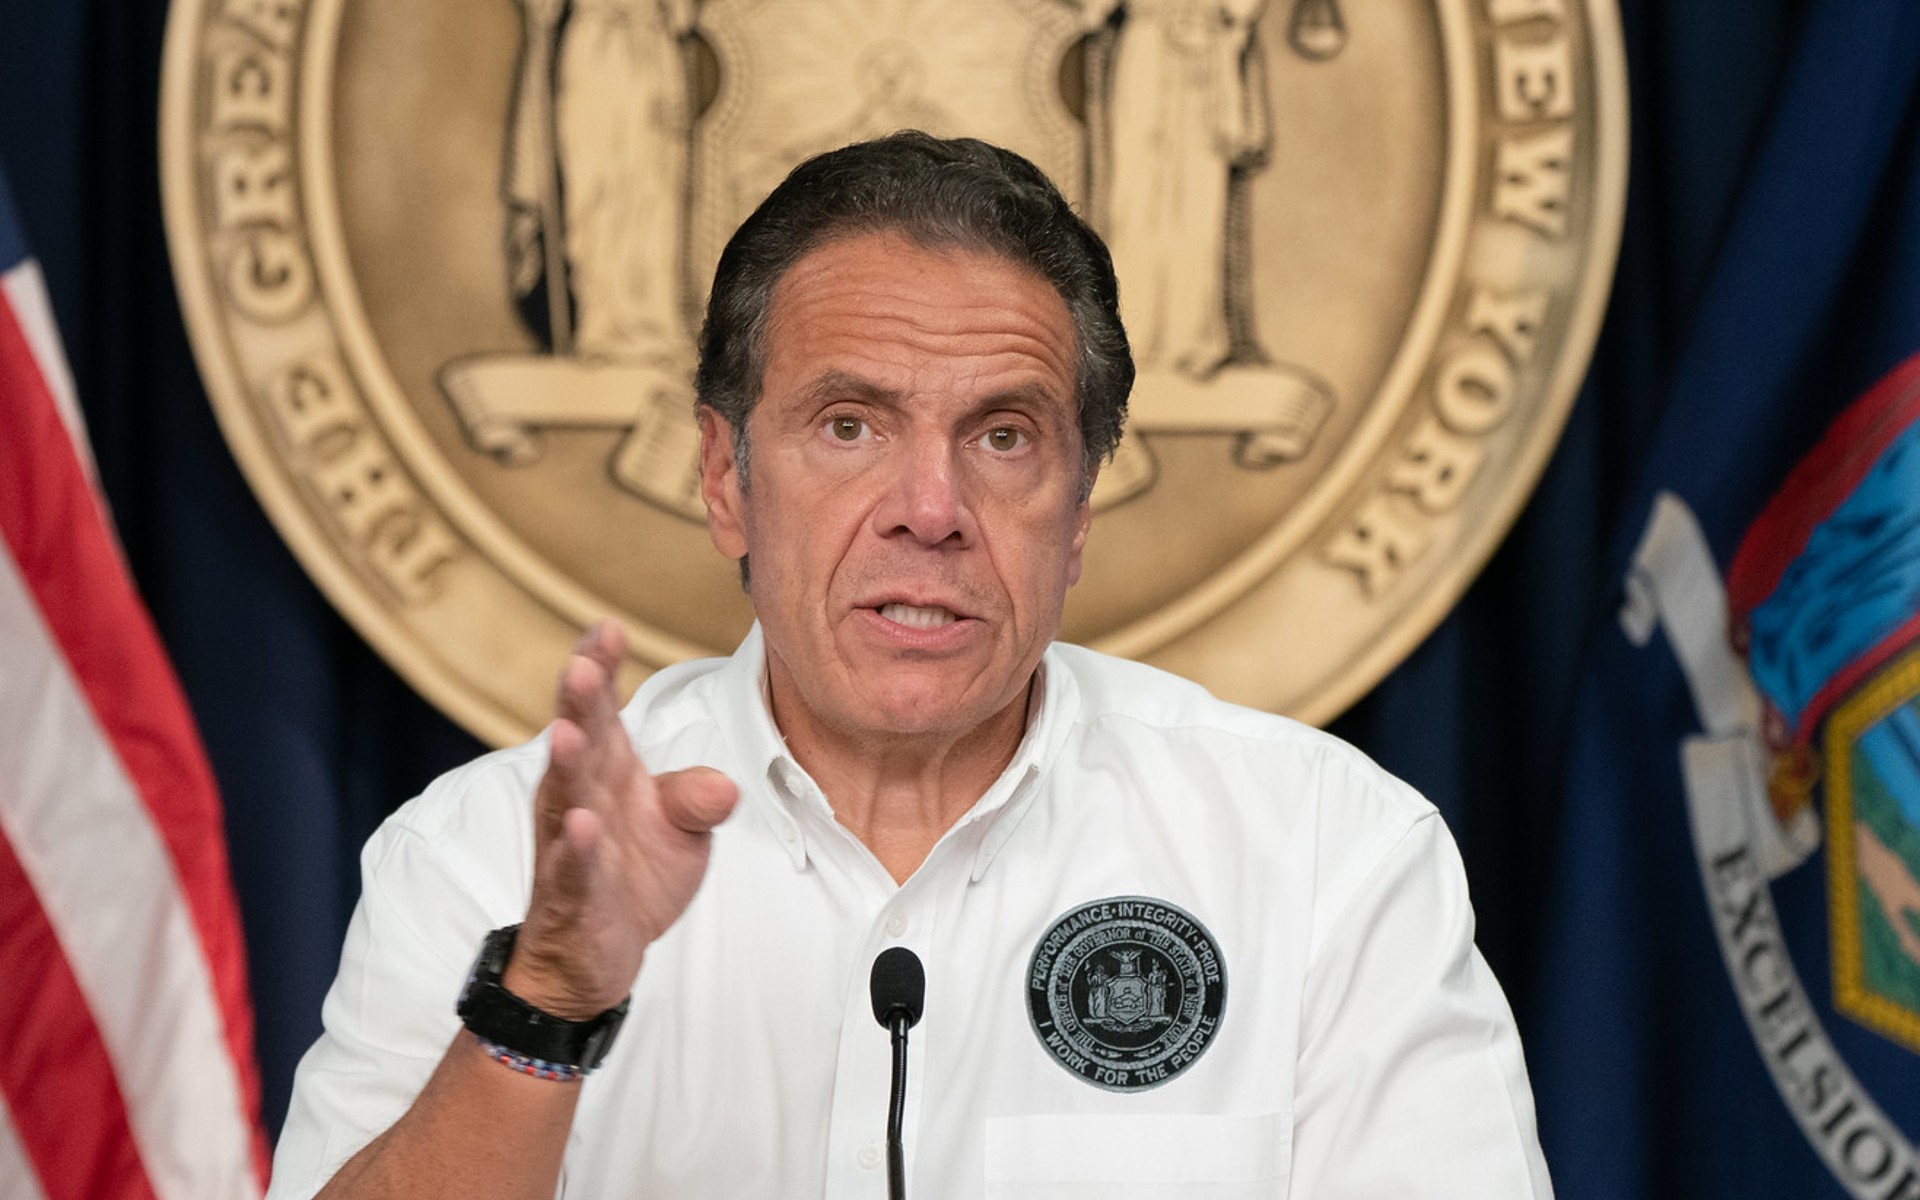 Former NY Governor Andrew Cuomo, in a white polo shirt, points his finger at the camera